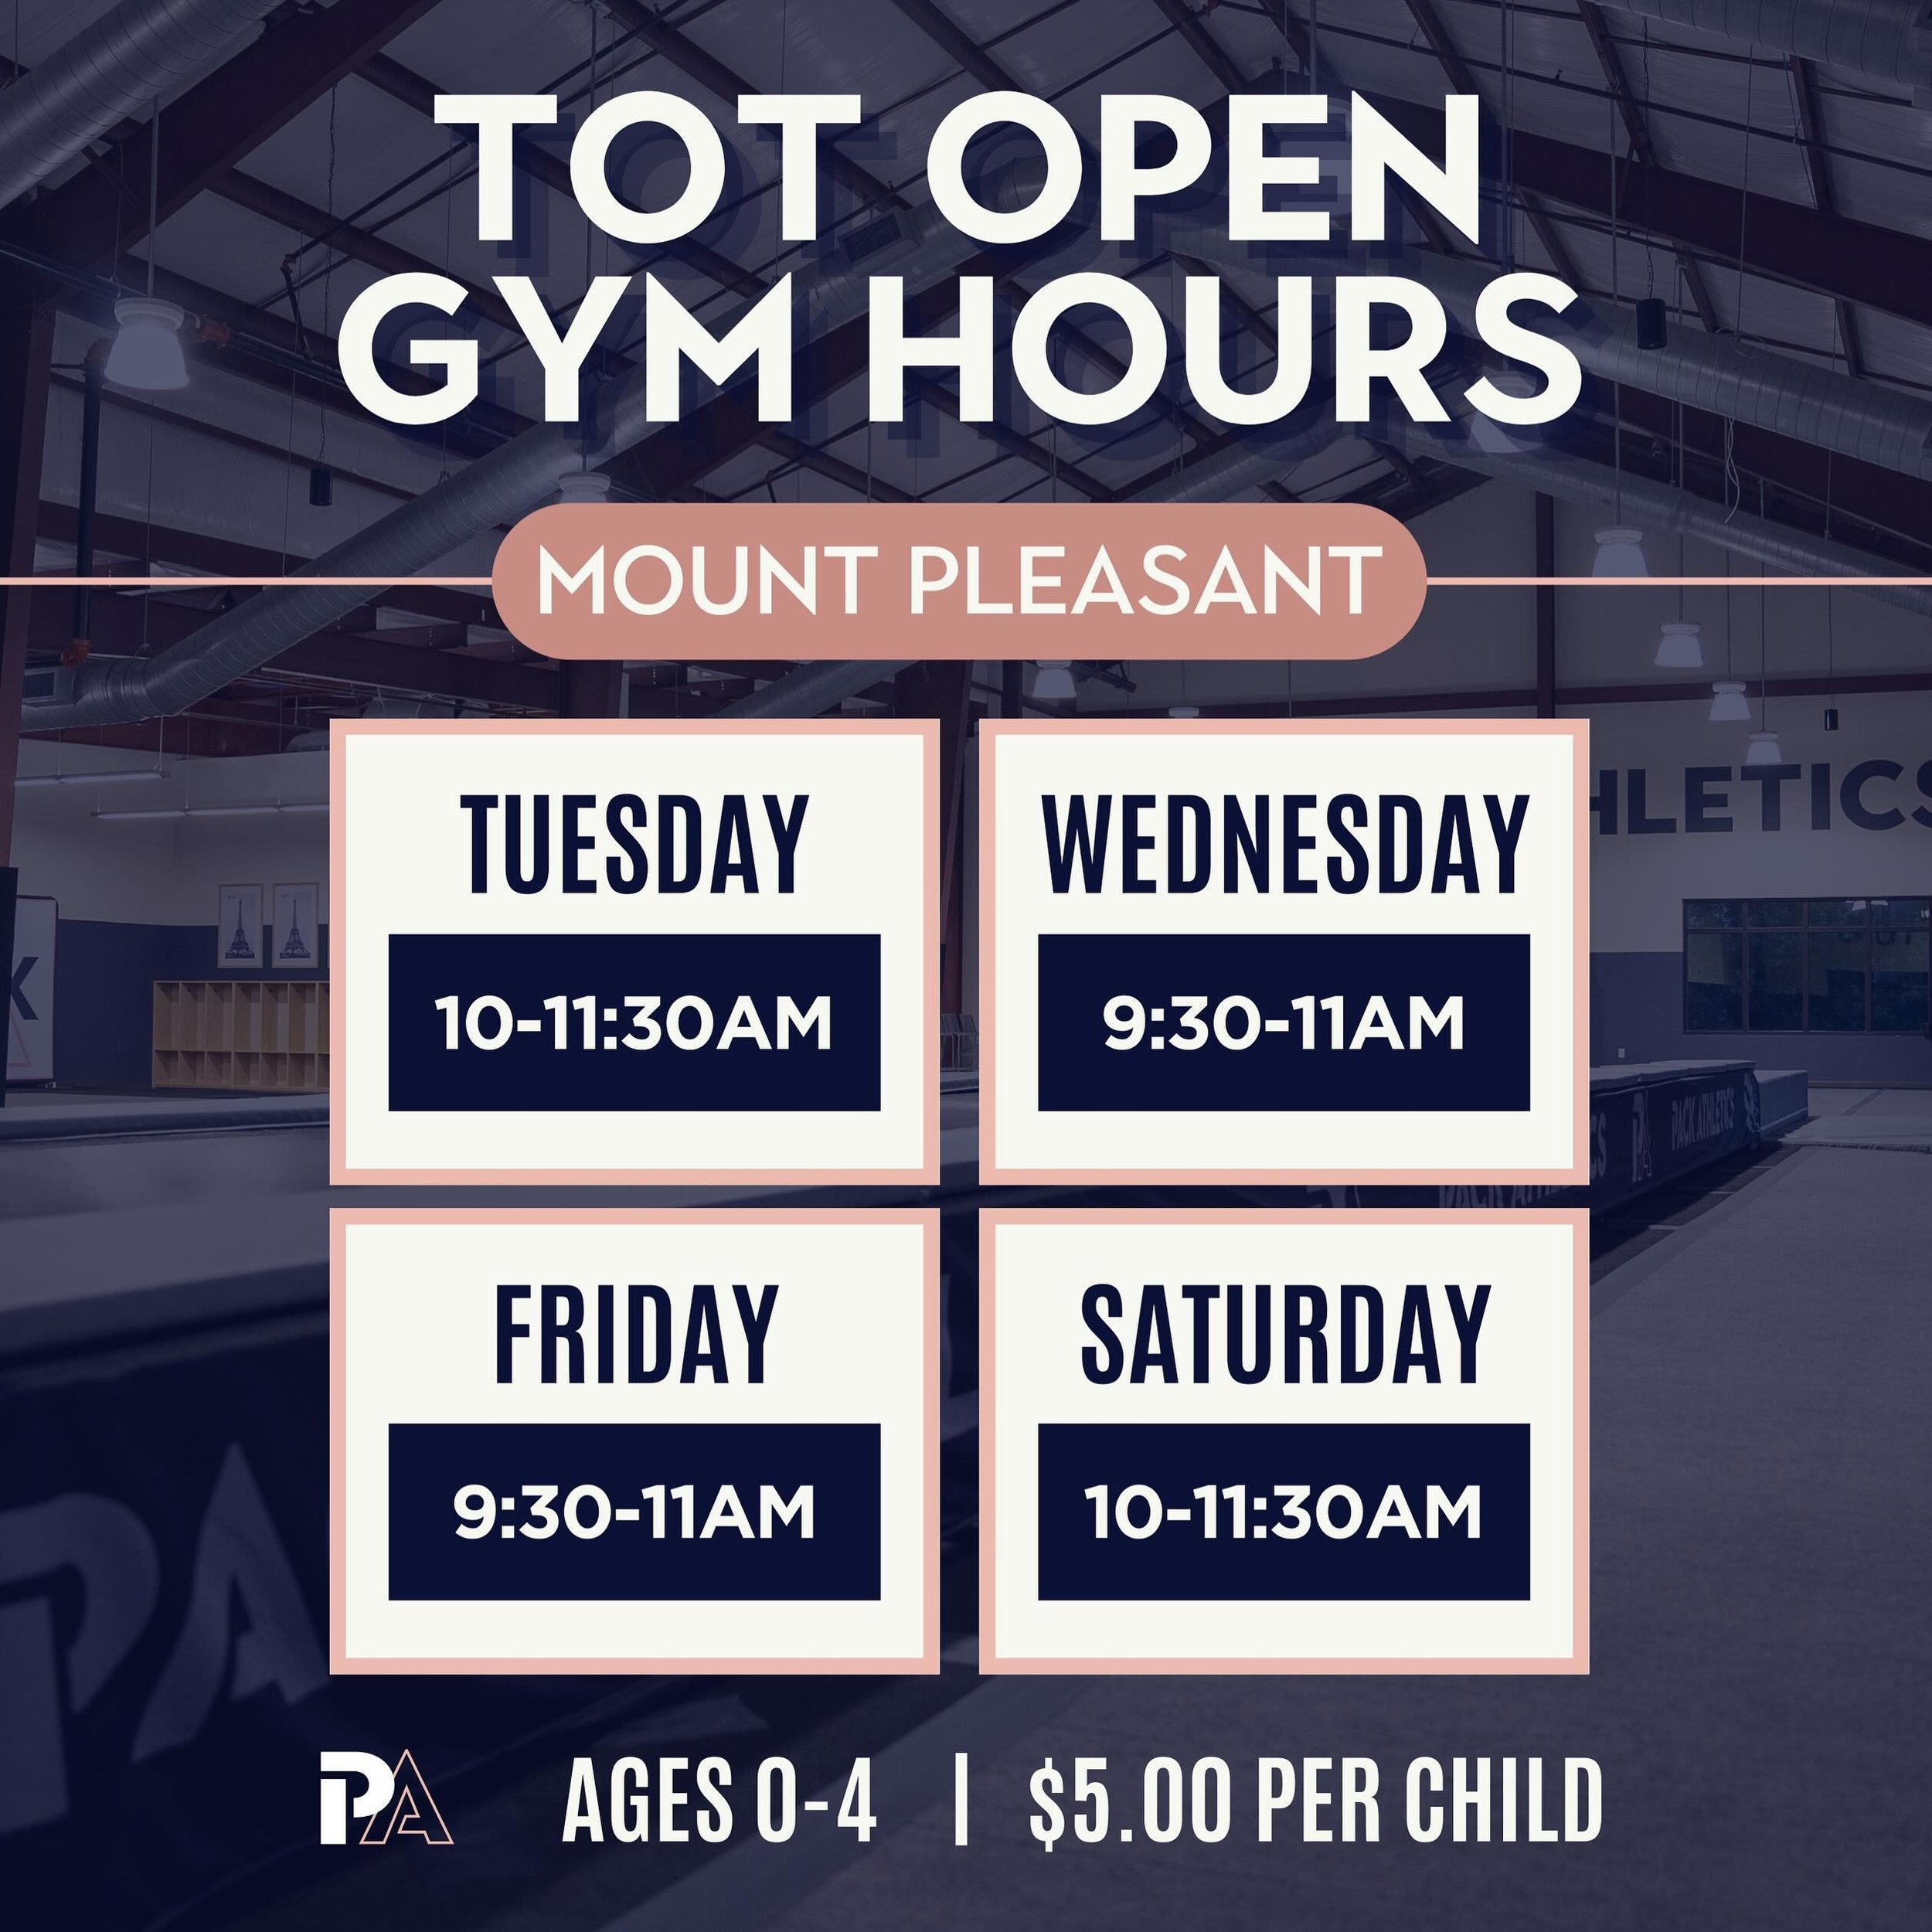 NEW TOT OPEN GYM HOURS FOR MOUNT PLEASANT!